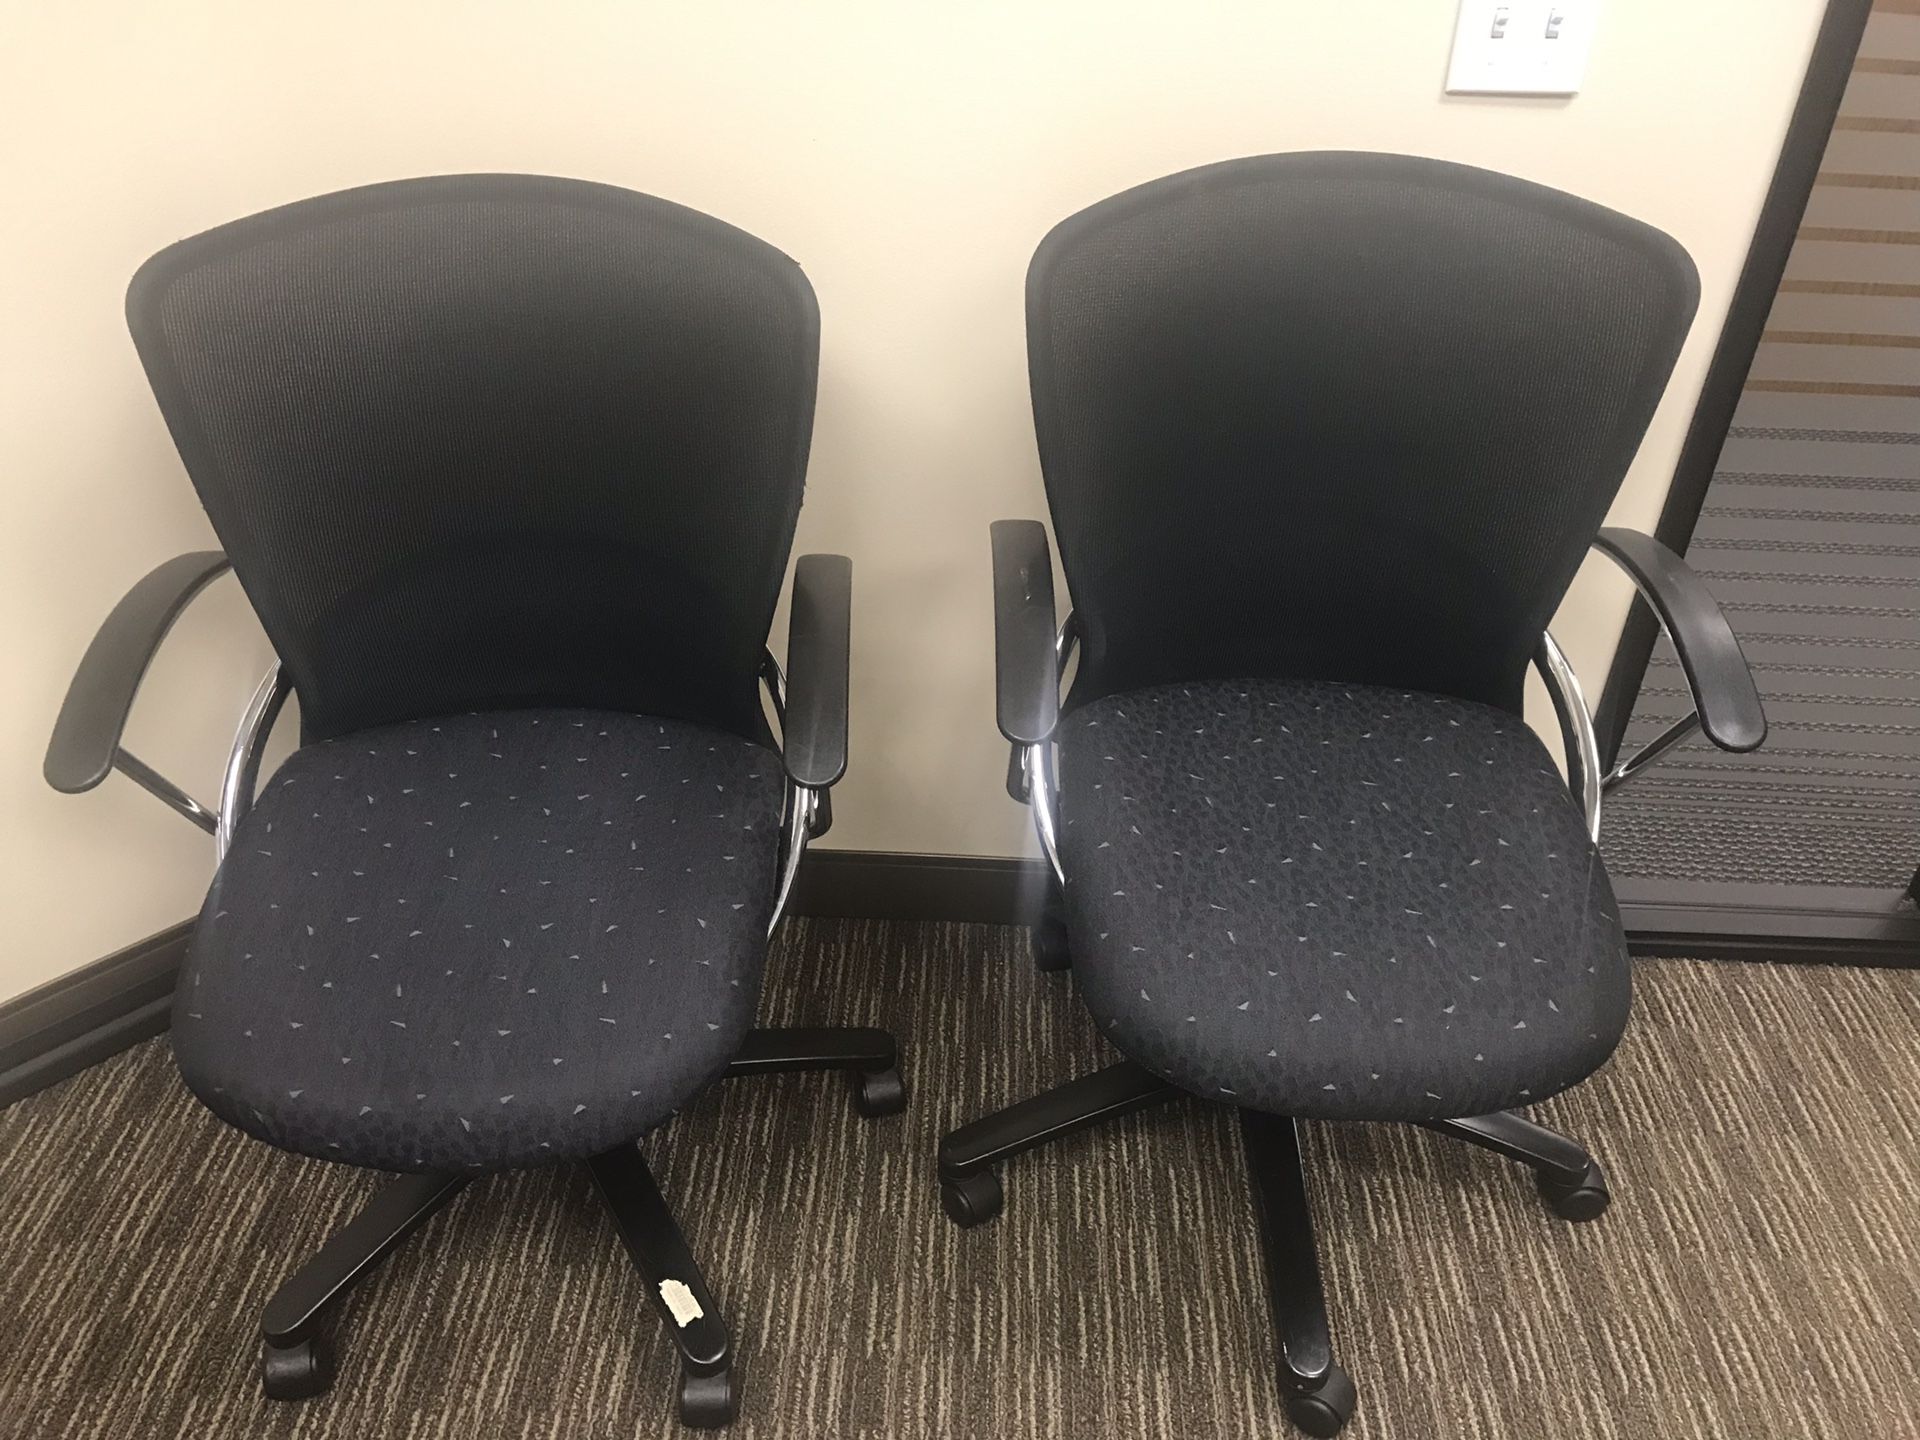 Adjustable office chair with wheels